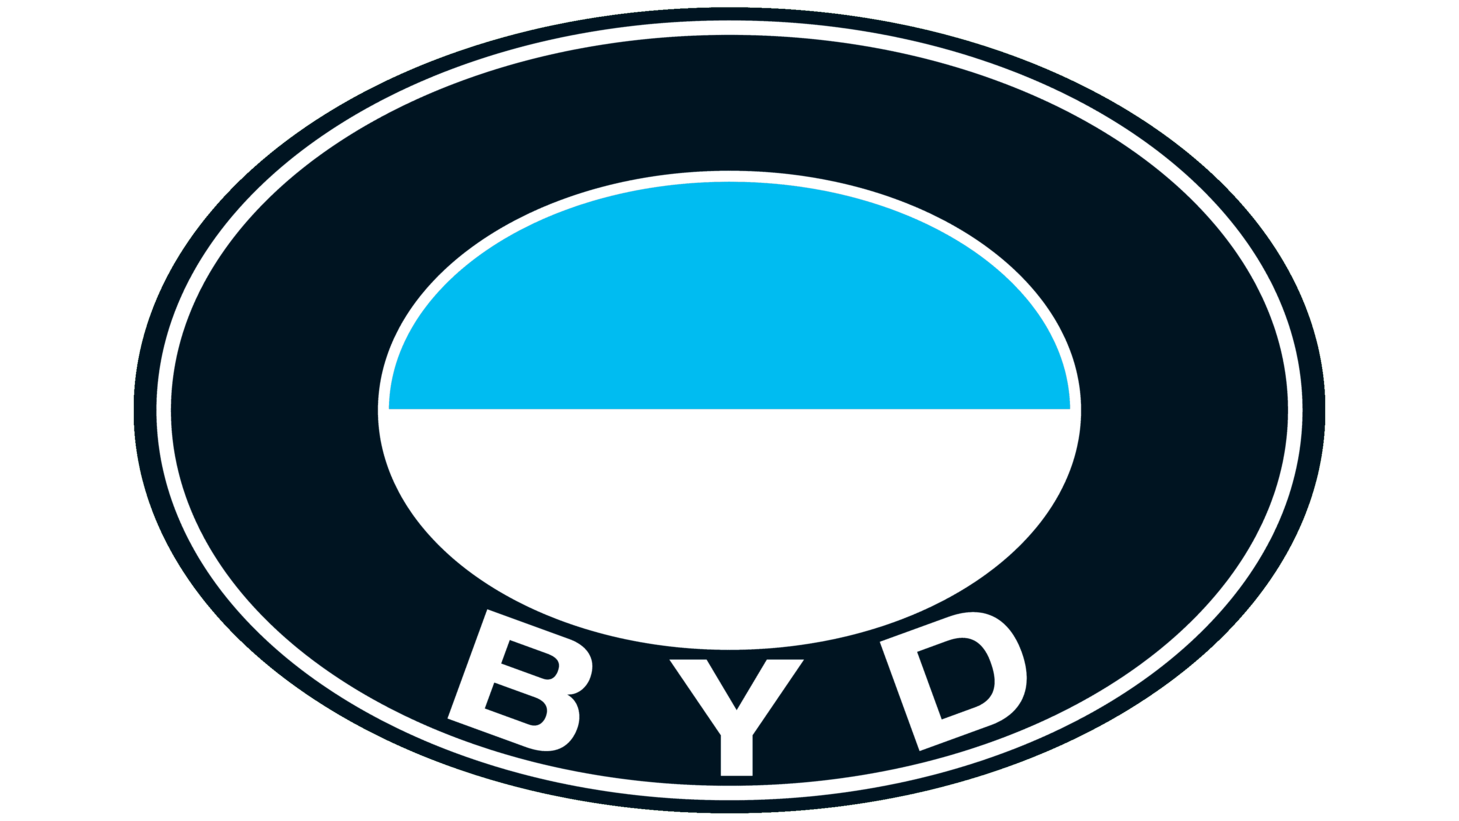 Byd sign 2003 2005